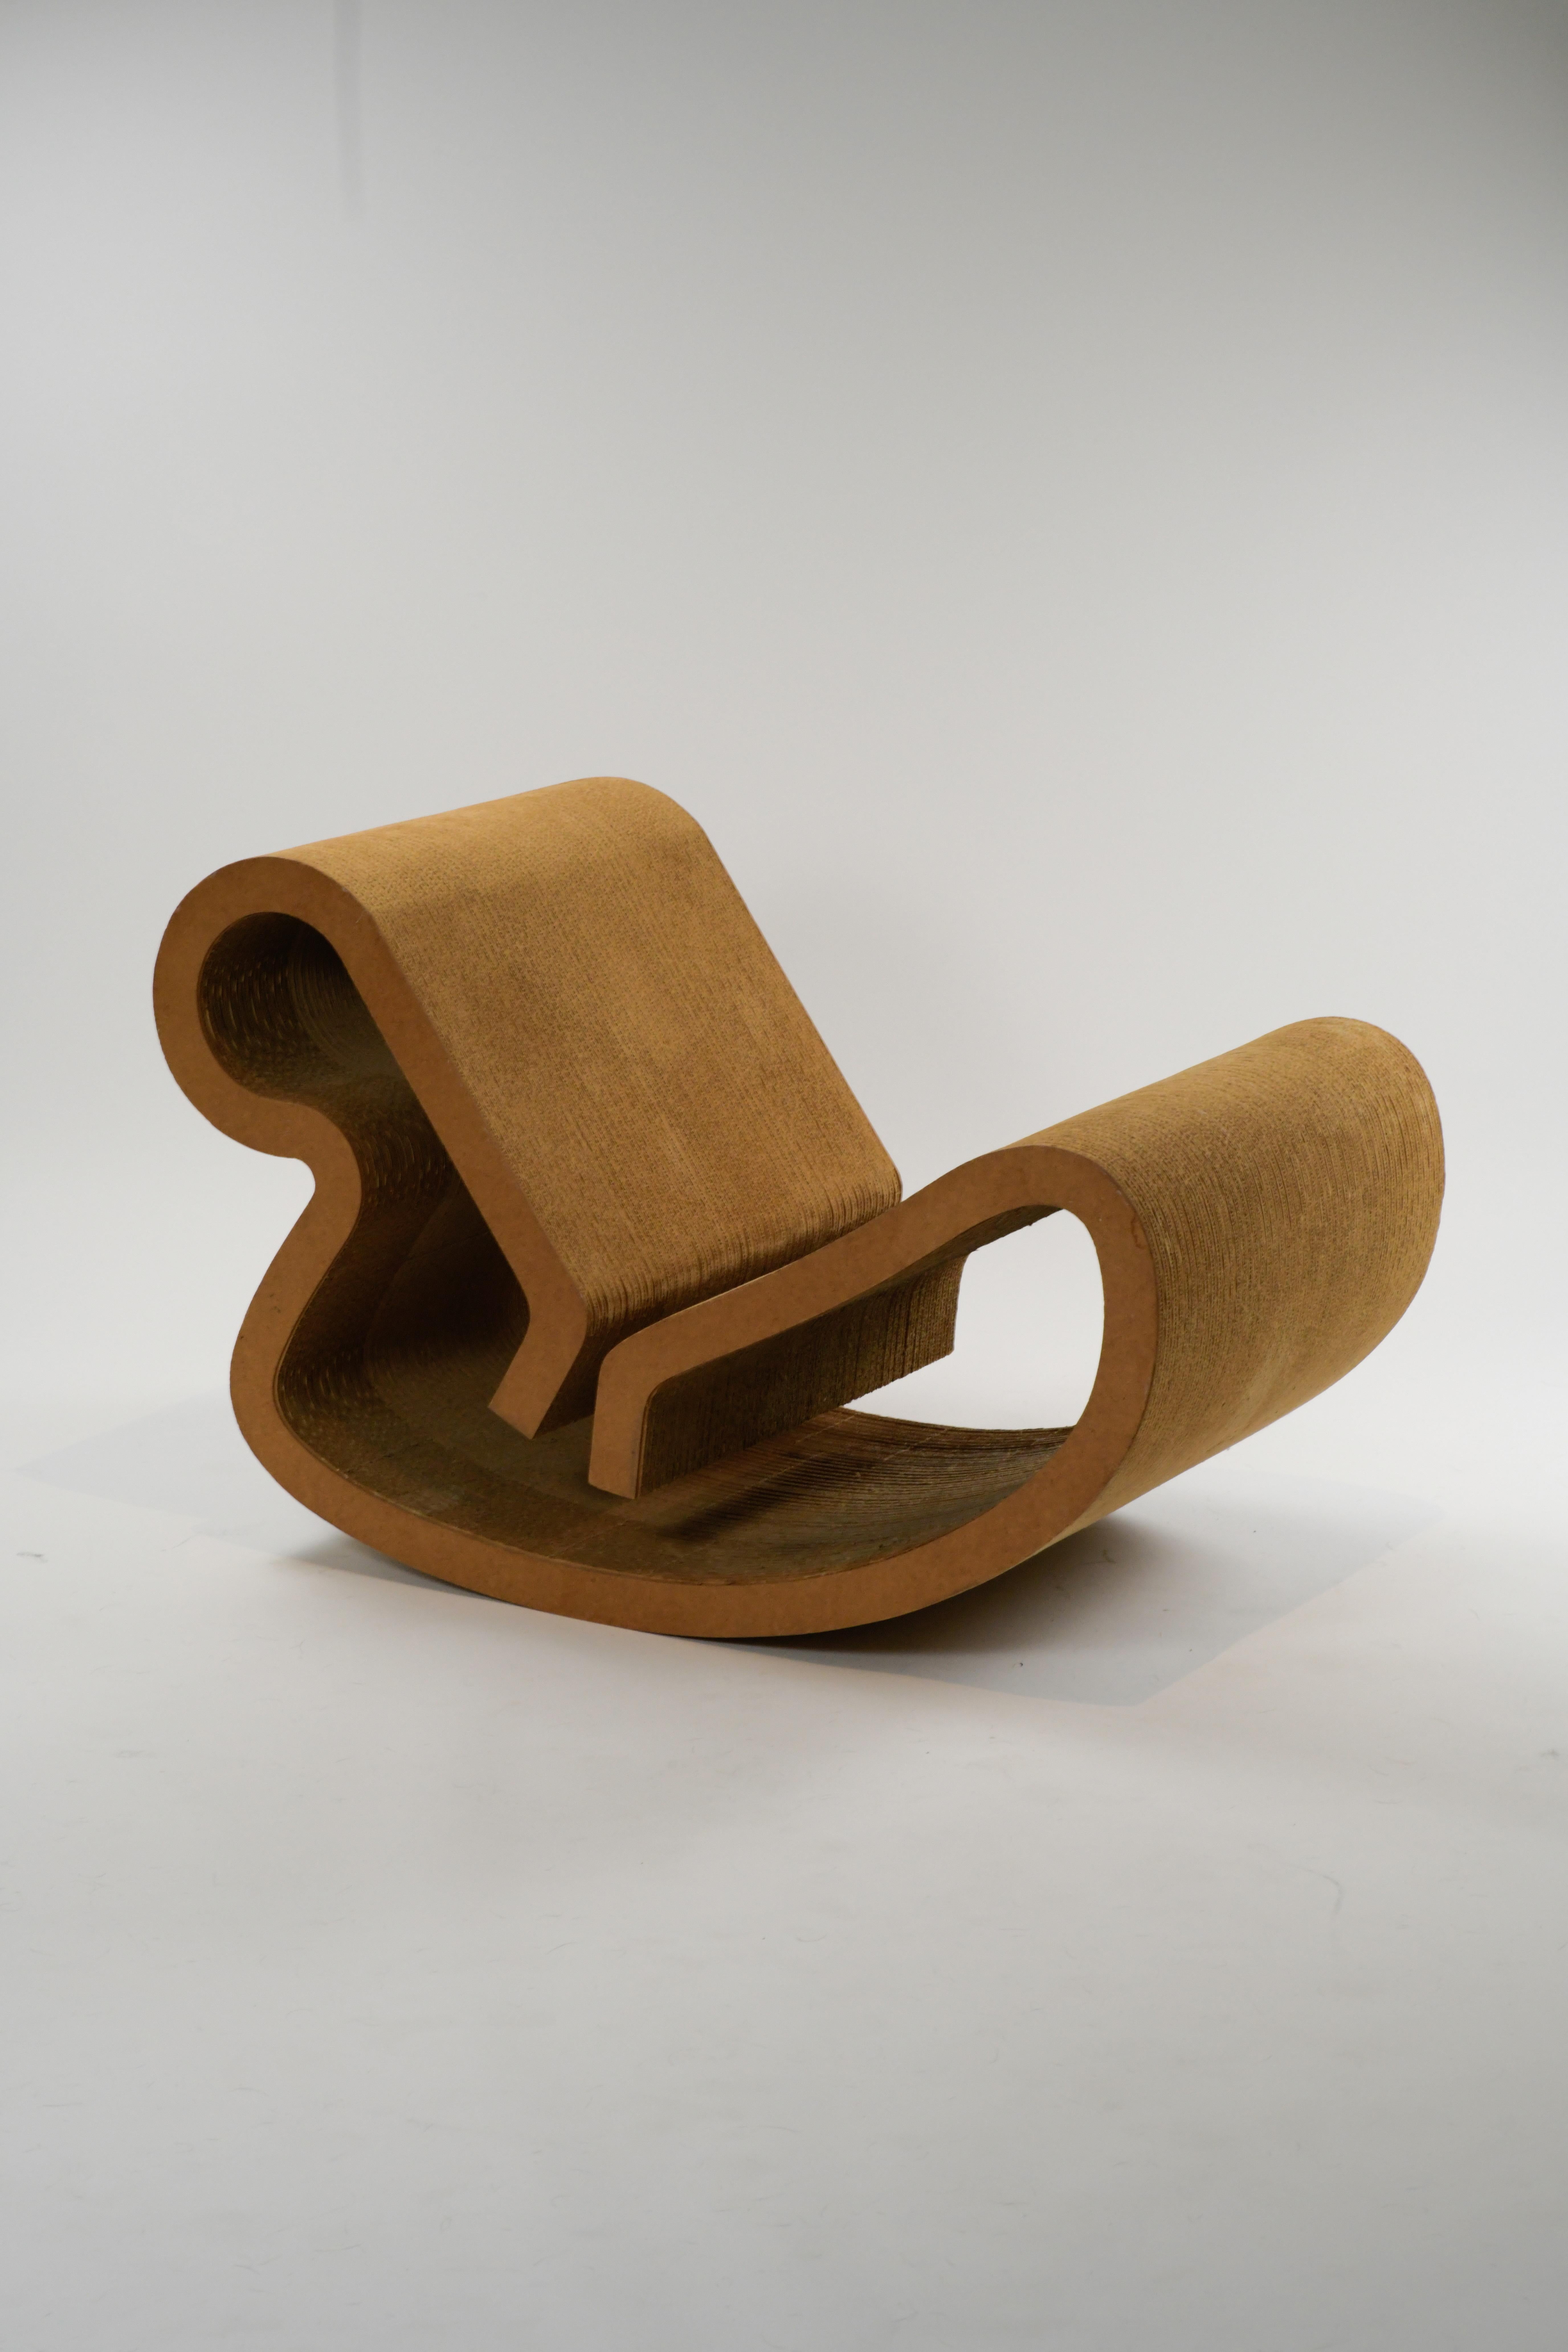 1972 Frank Gehry 'Contour' Rocking Lounge Chair by Easy Edges Inc.  In Good Condition For Sale In Los Angeles, CA